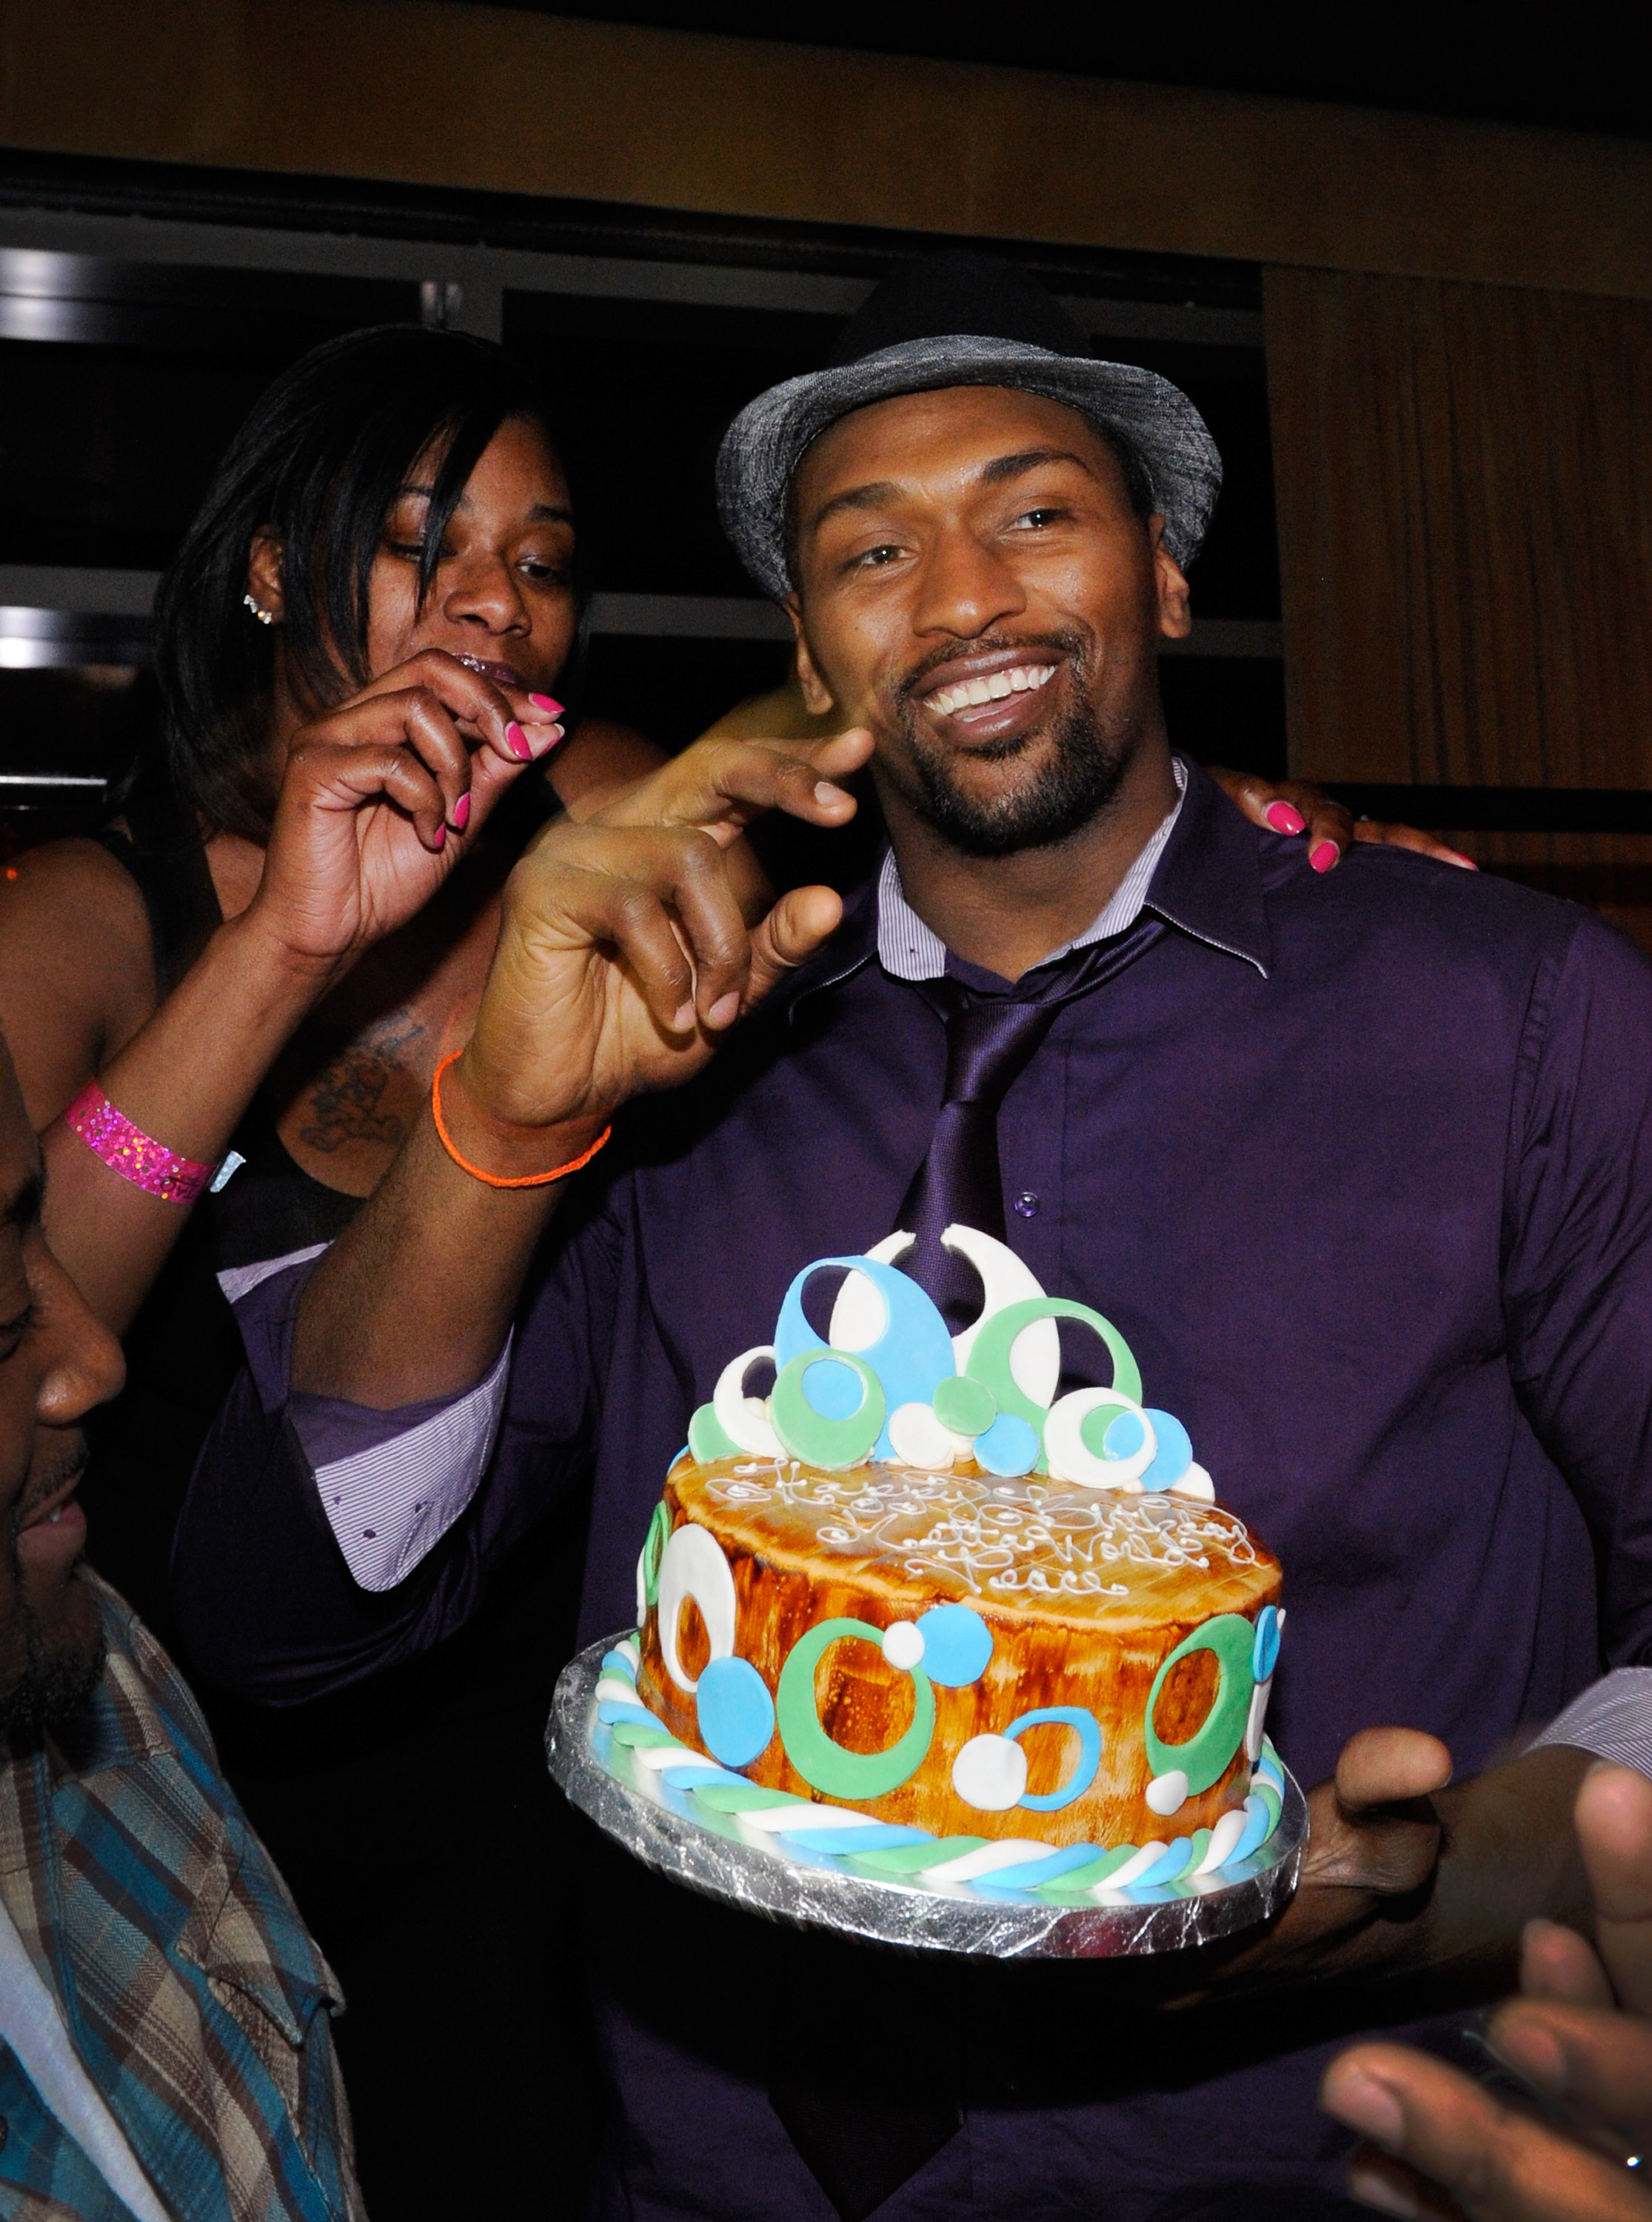 Kimsha Artest celebrates Metta World Peace's birthday at the Lavo Nightclub at The Palazzo on November 12, 2011, in Las Vegas, Nevada. | Source: Getty Images